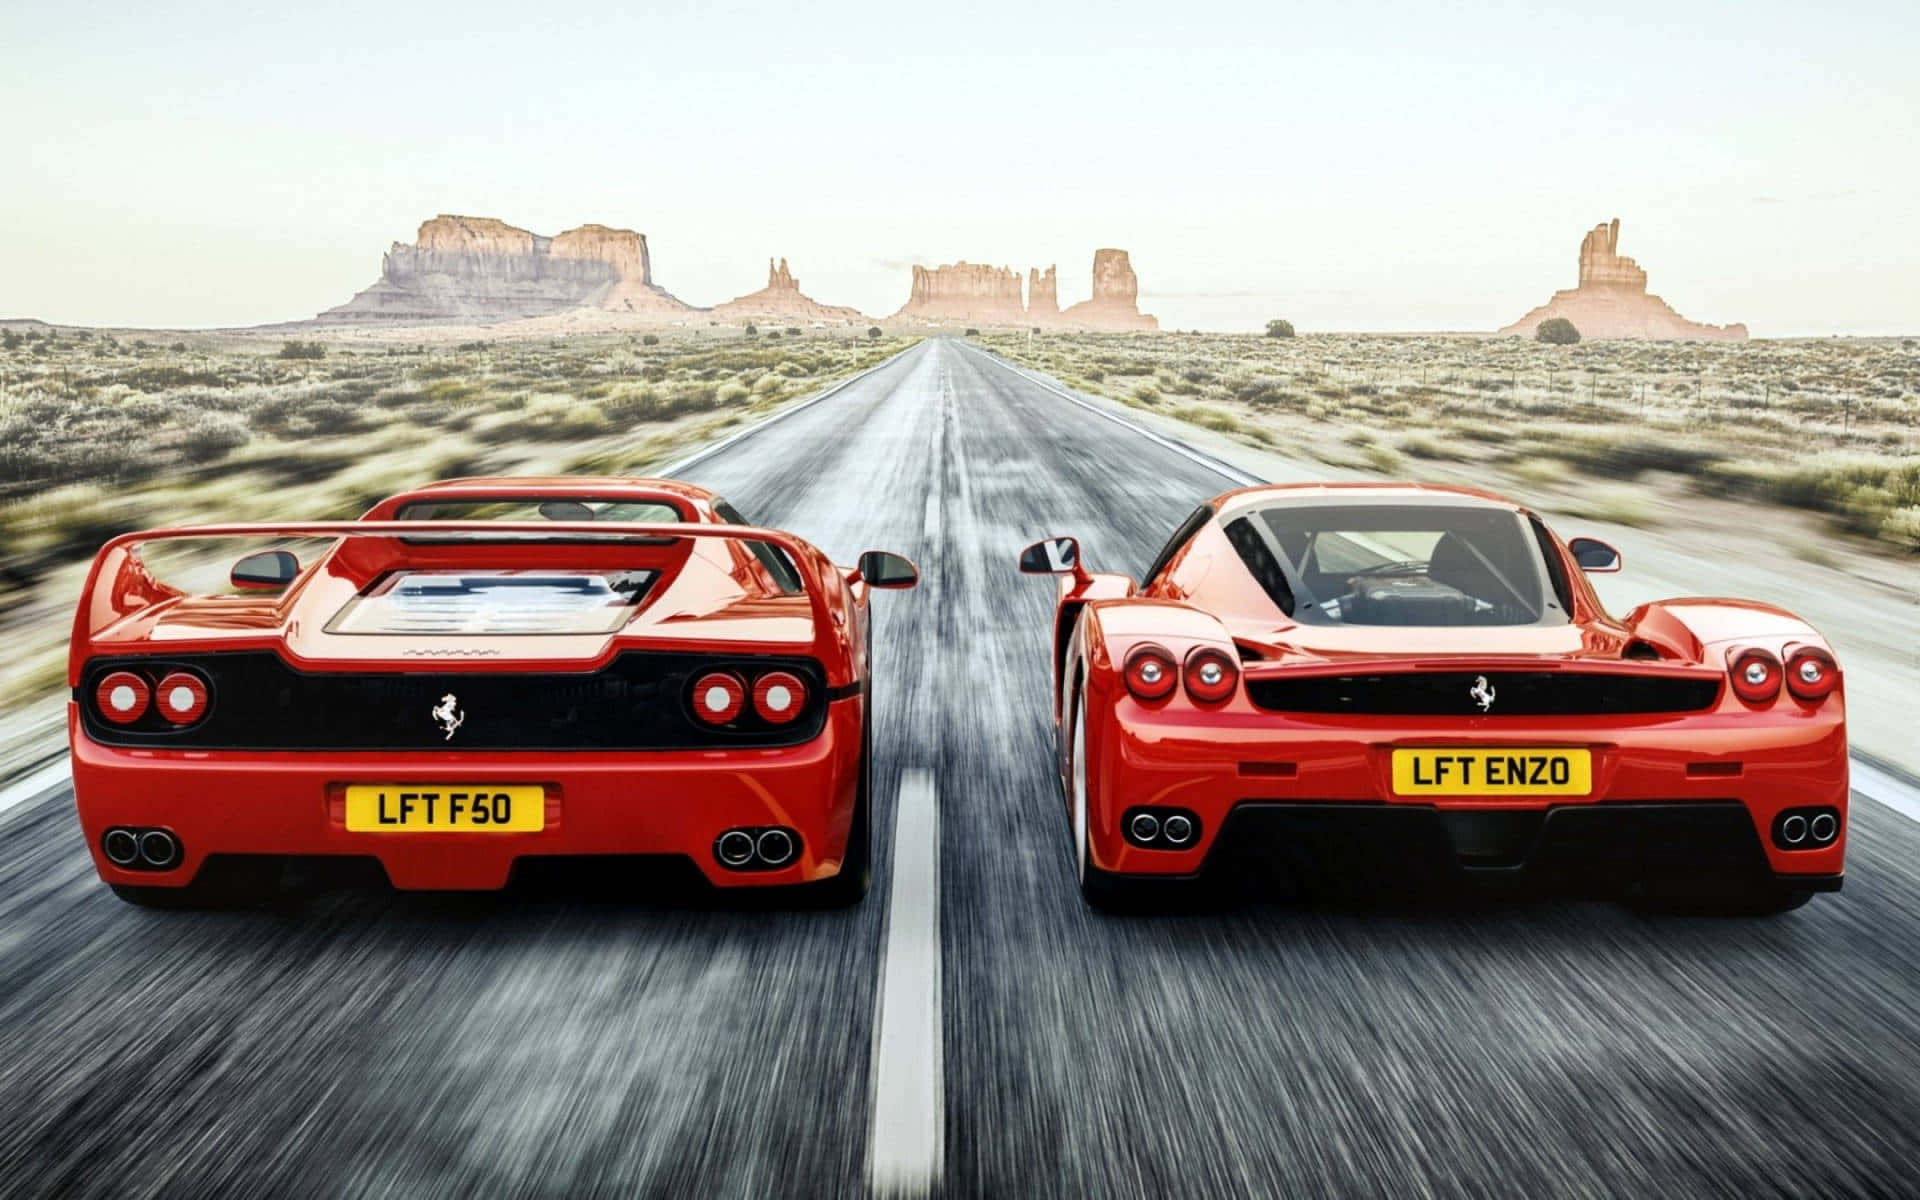 Slip behind the wheel of the GTB and feel the power of a true Ferrari Wallpaper